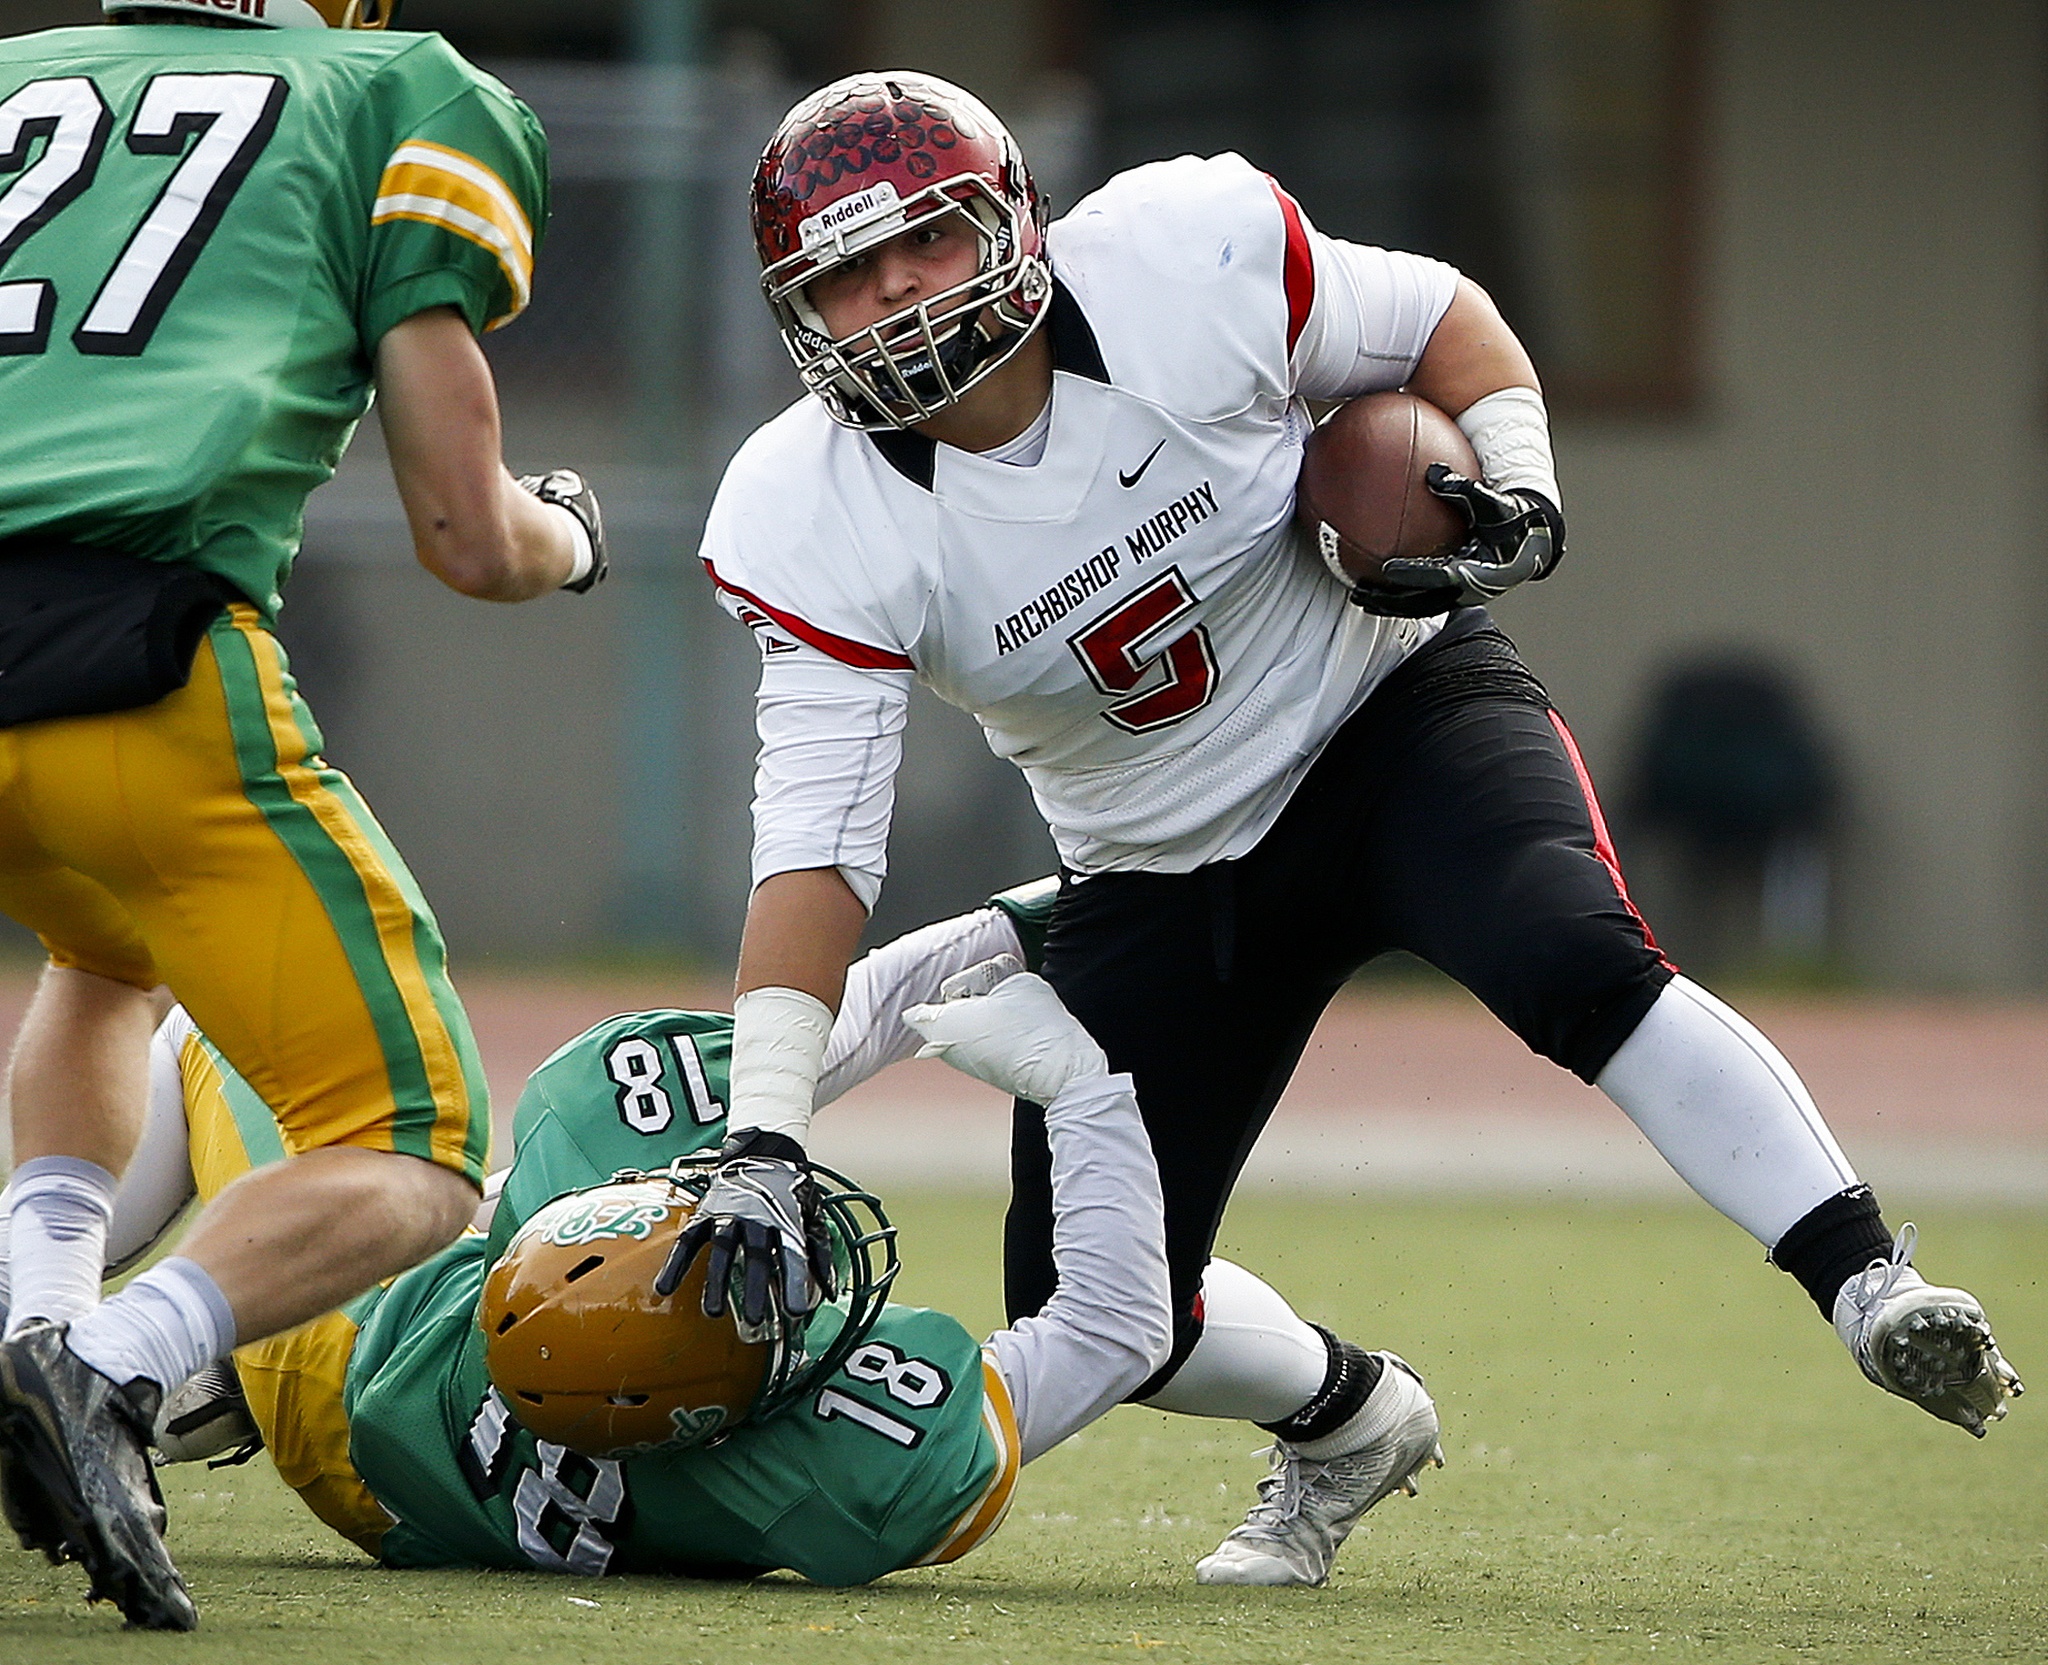 Archbishop Murphy’s Ben Hines (right) stiff-arms Tumwater’s Andrew May to the ground during a 2A state playoff game at Tumwater High School on Saturday. (Ian Terry / The Herald)